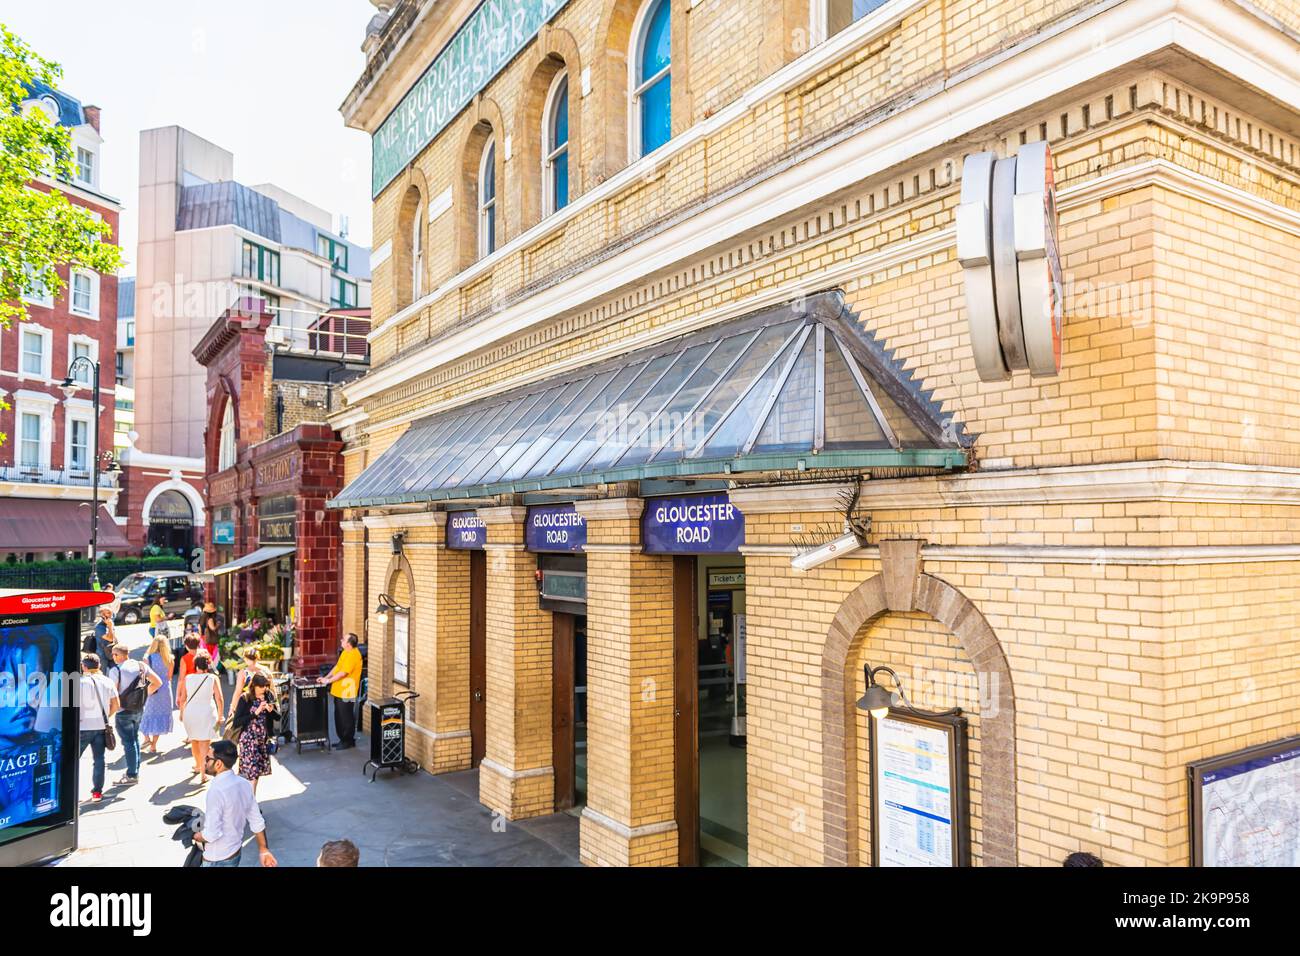 London, United Kingdom - June 22, 2018: Neighborhood of south Kensington with Gloucester road station sign during summer day above view Stock Photo